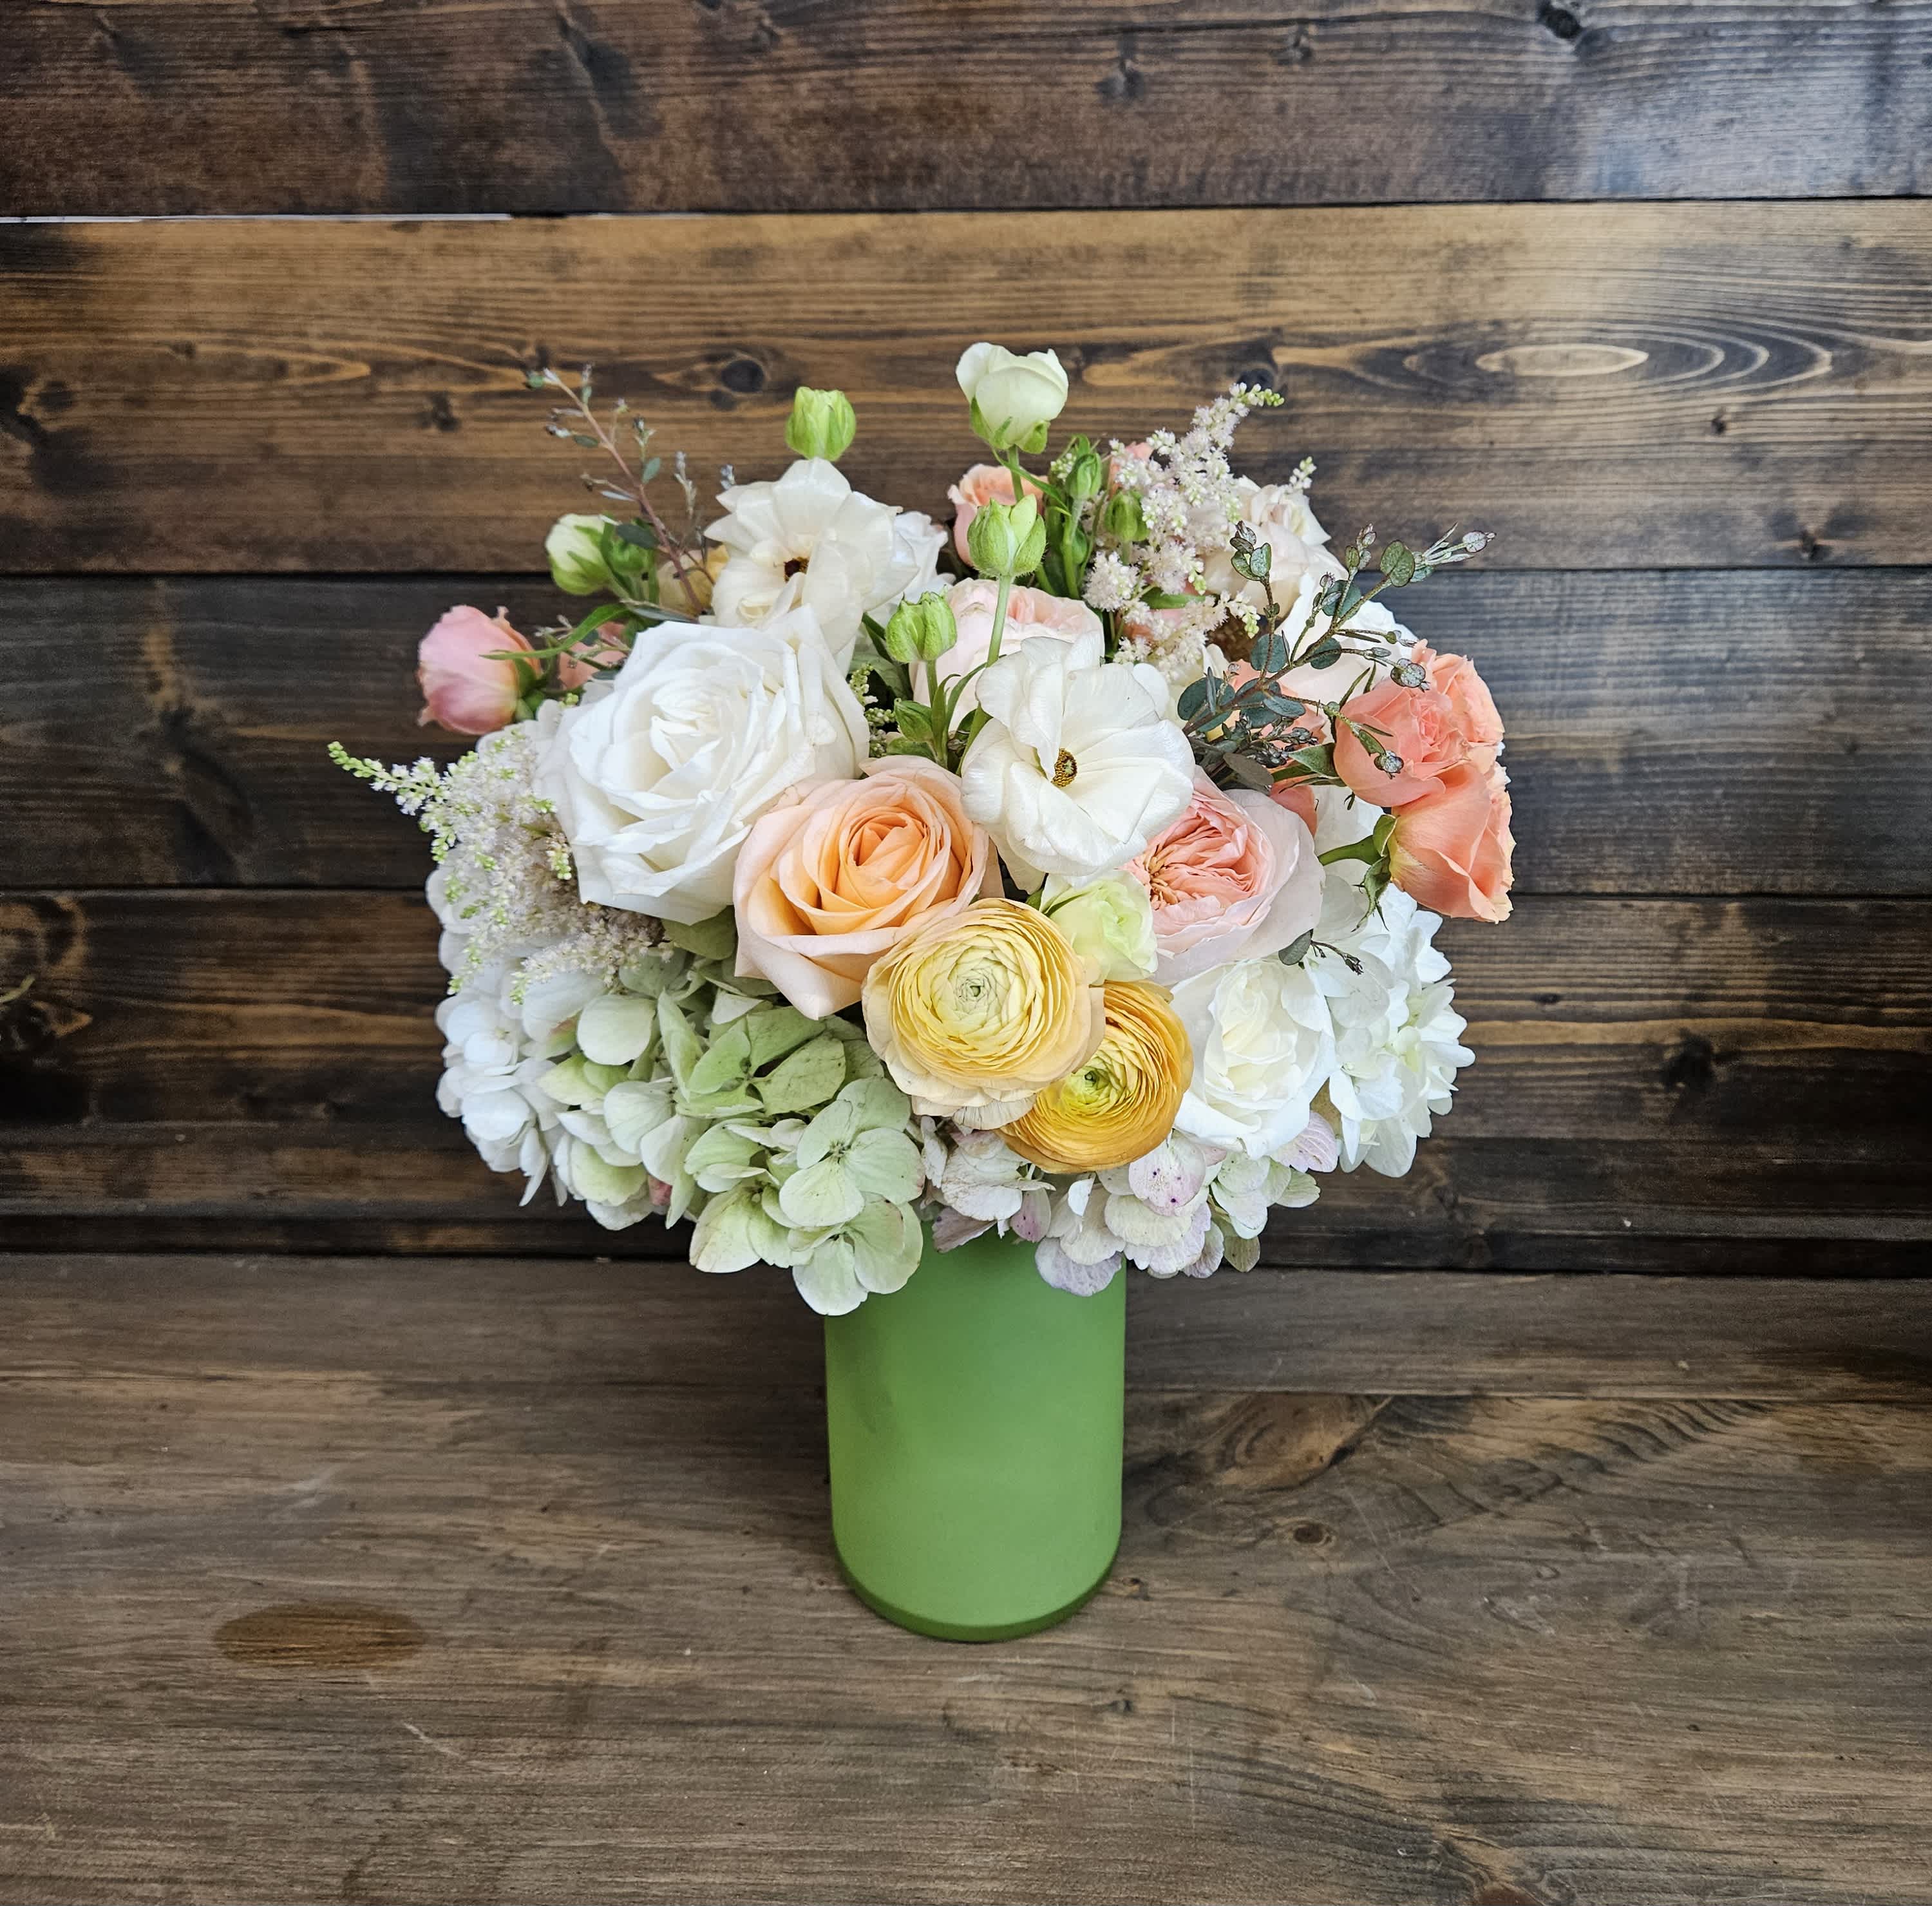 Sunny Blossoms - This &quot;fresh from the garden&quot; arrangement features Garden Roses, Ranunculus, Hydrangea, and Astilbe.